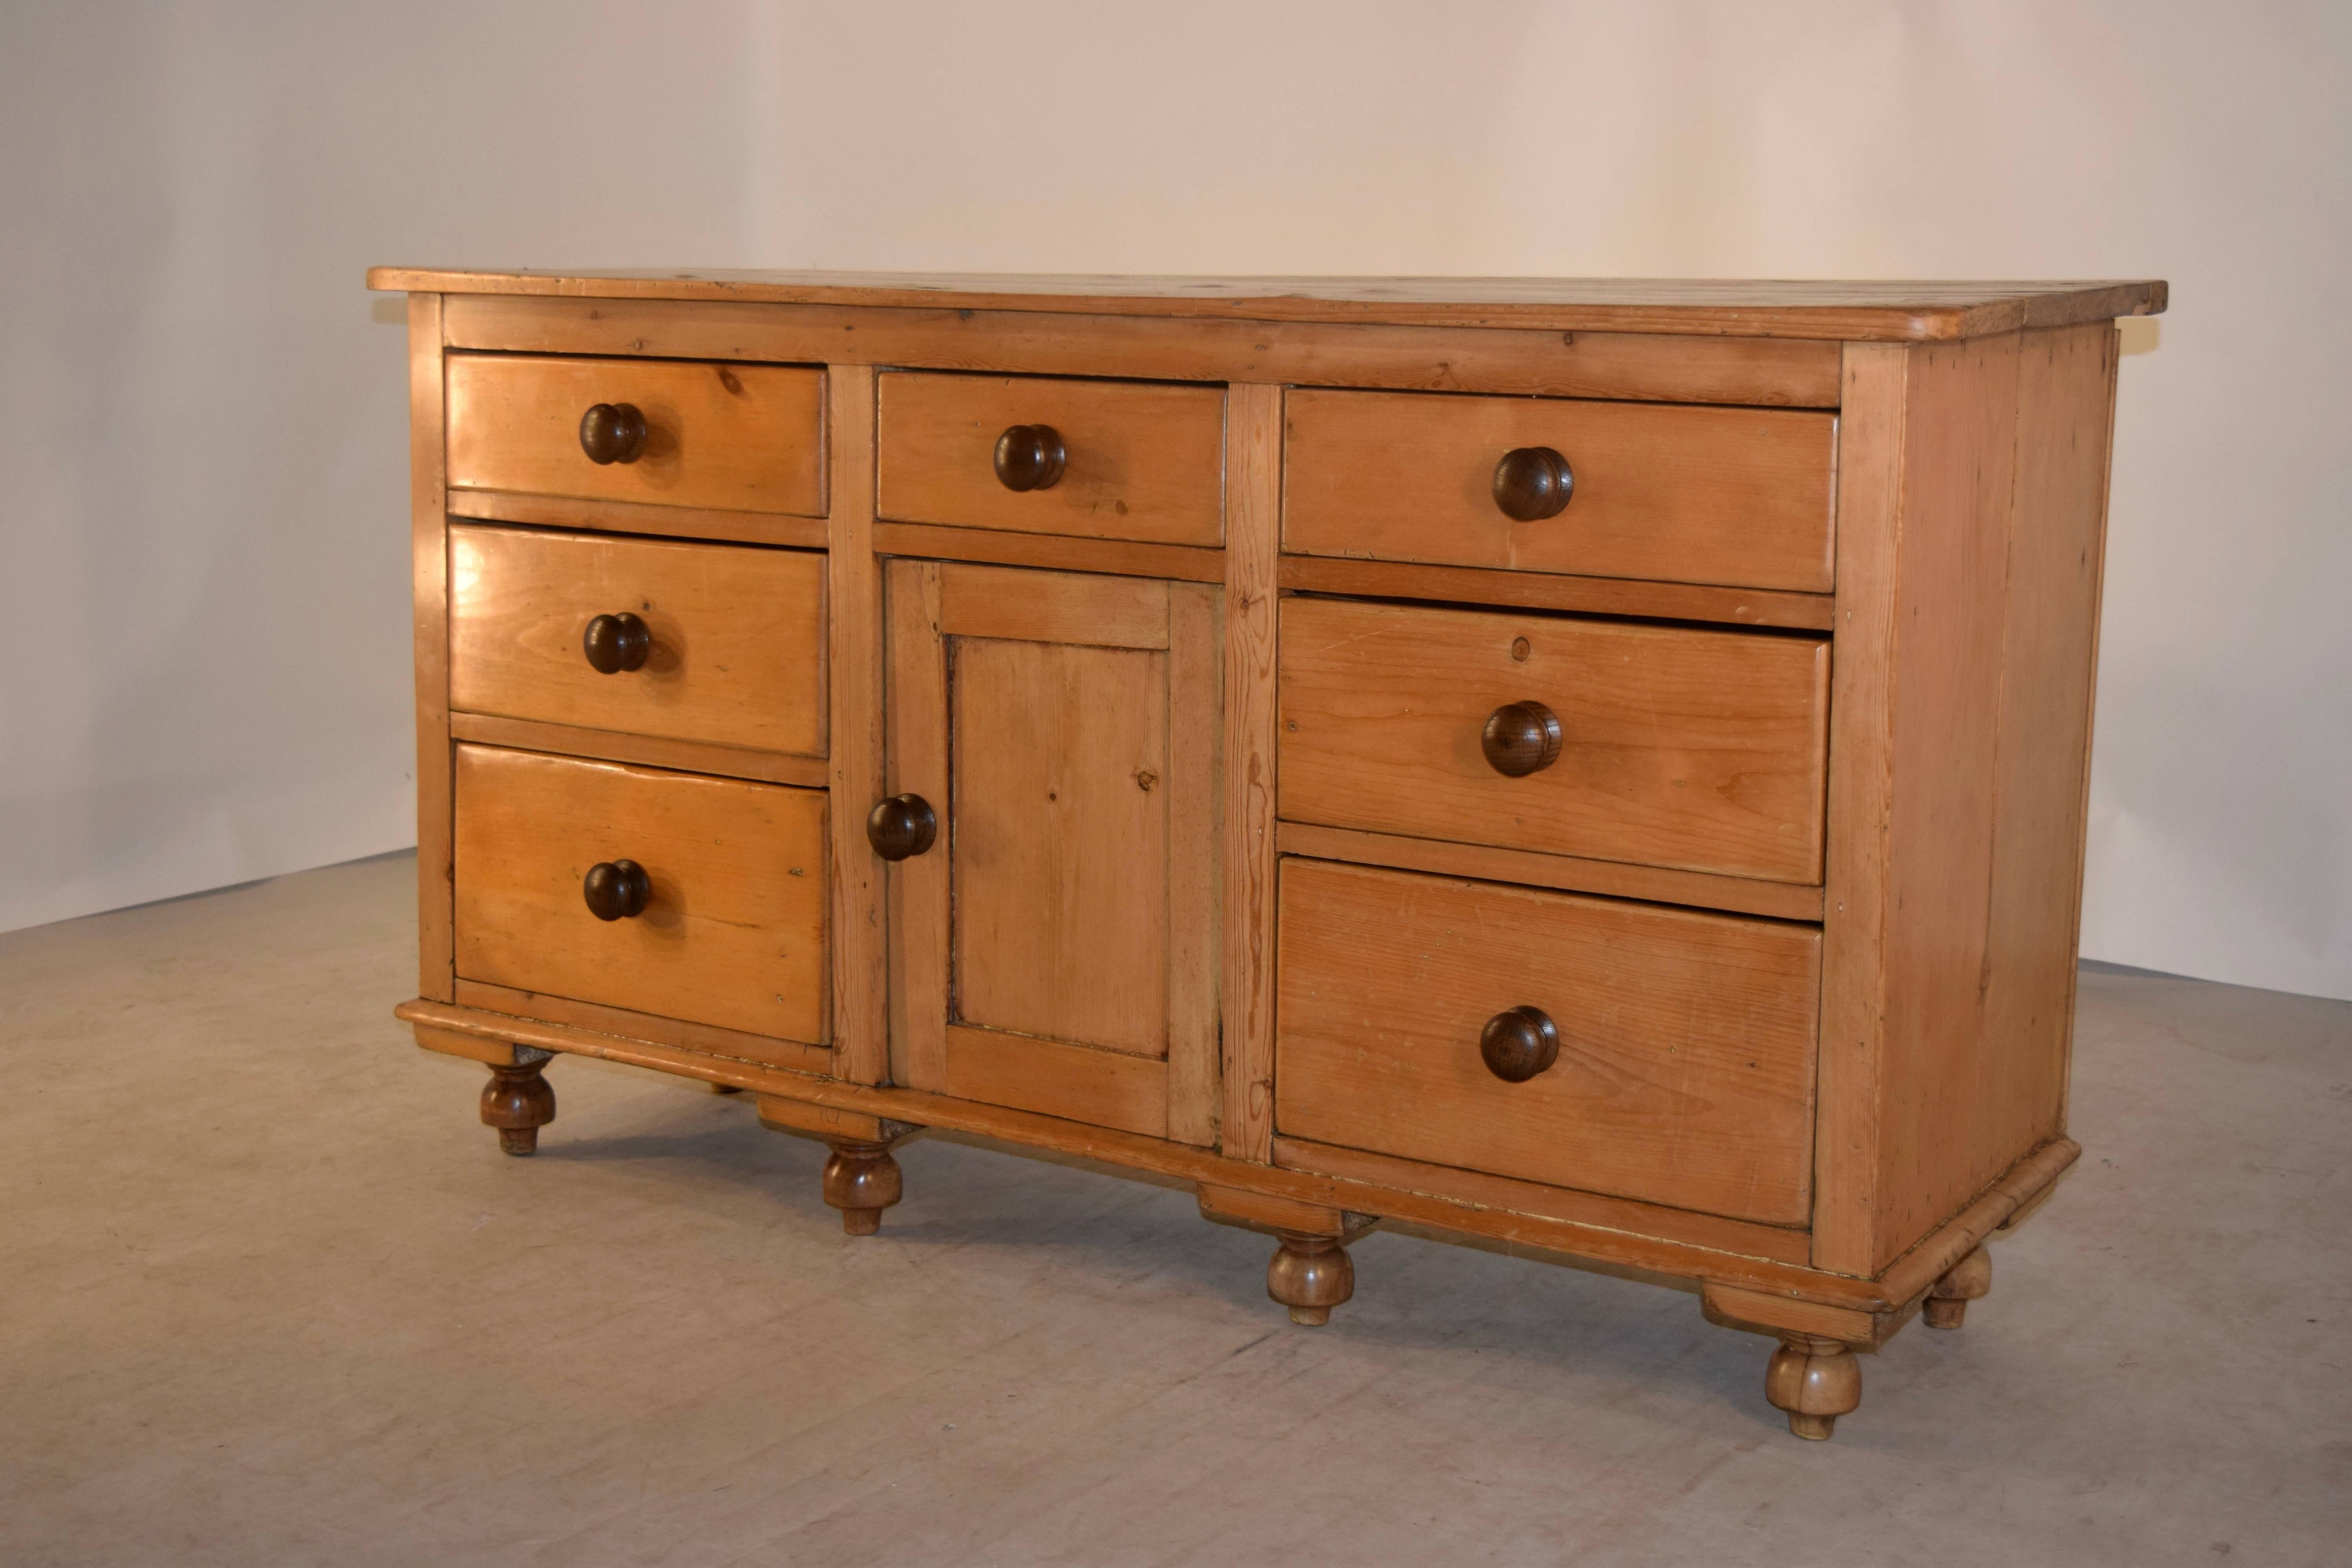 19th century pine dresser base from England. The top is made up of planks, and follow down to simple sides and two banks of three drawers each flanking a central drawer and lower door, which opens to reveal storage. Raised on hand turned feet.